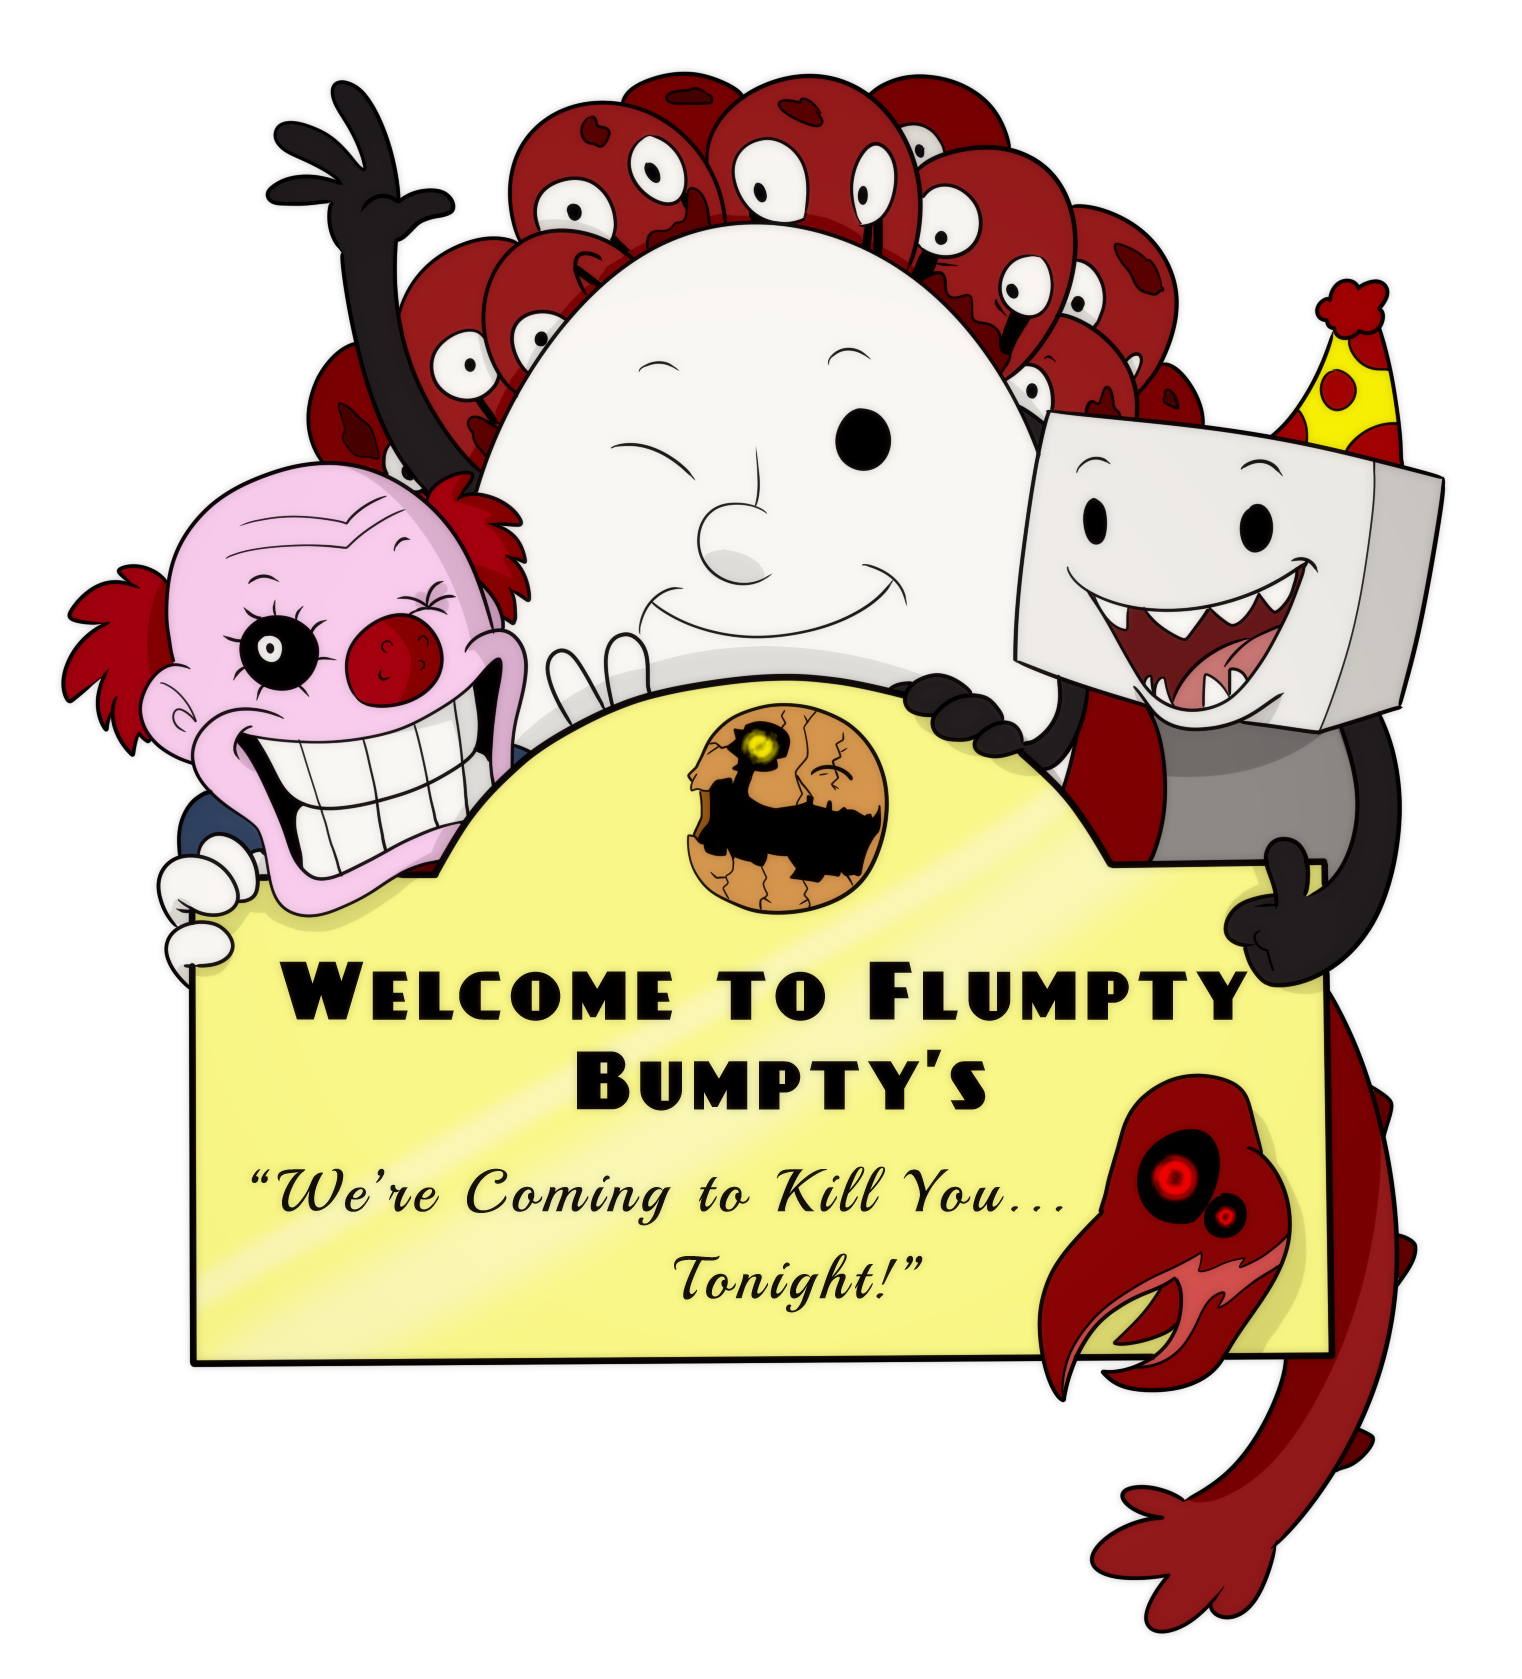 One night at flumpty's 2 by rocioam7 on DeviantArt